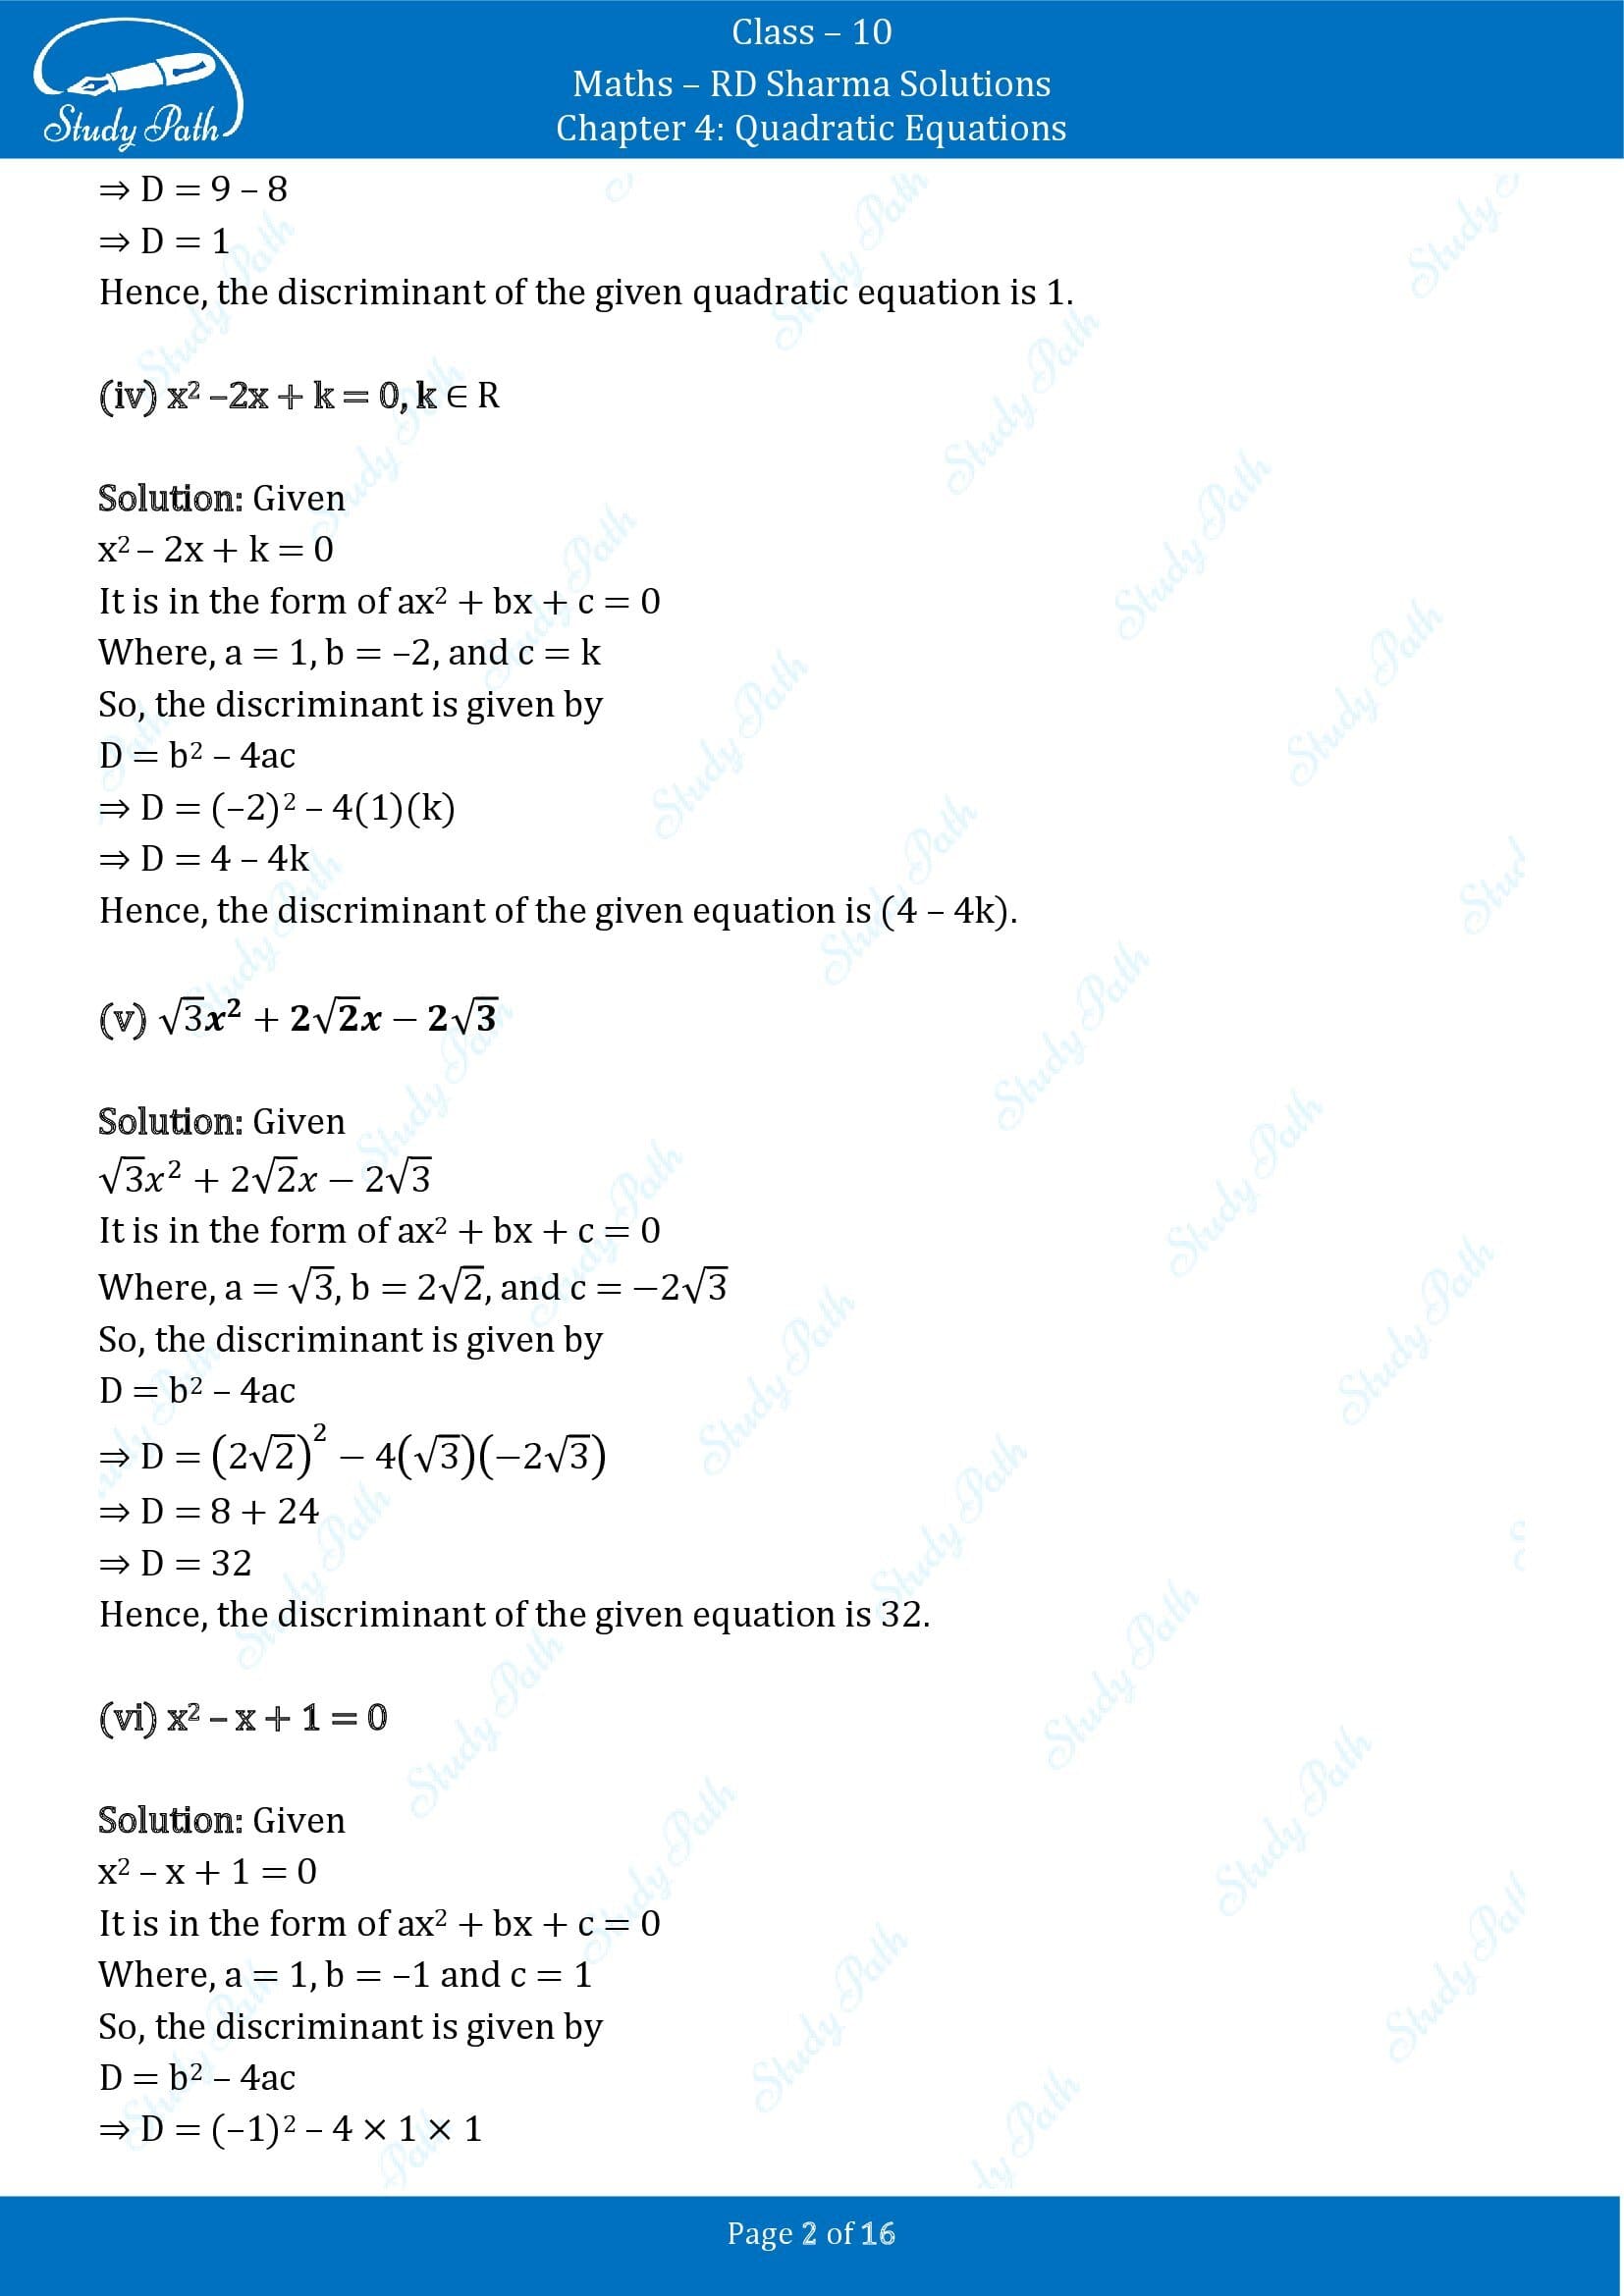 RD Sharma Solutions Class 10 Chapter 4 Quadratic Equations Exercise 4.5 00002